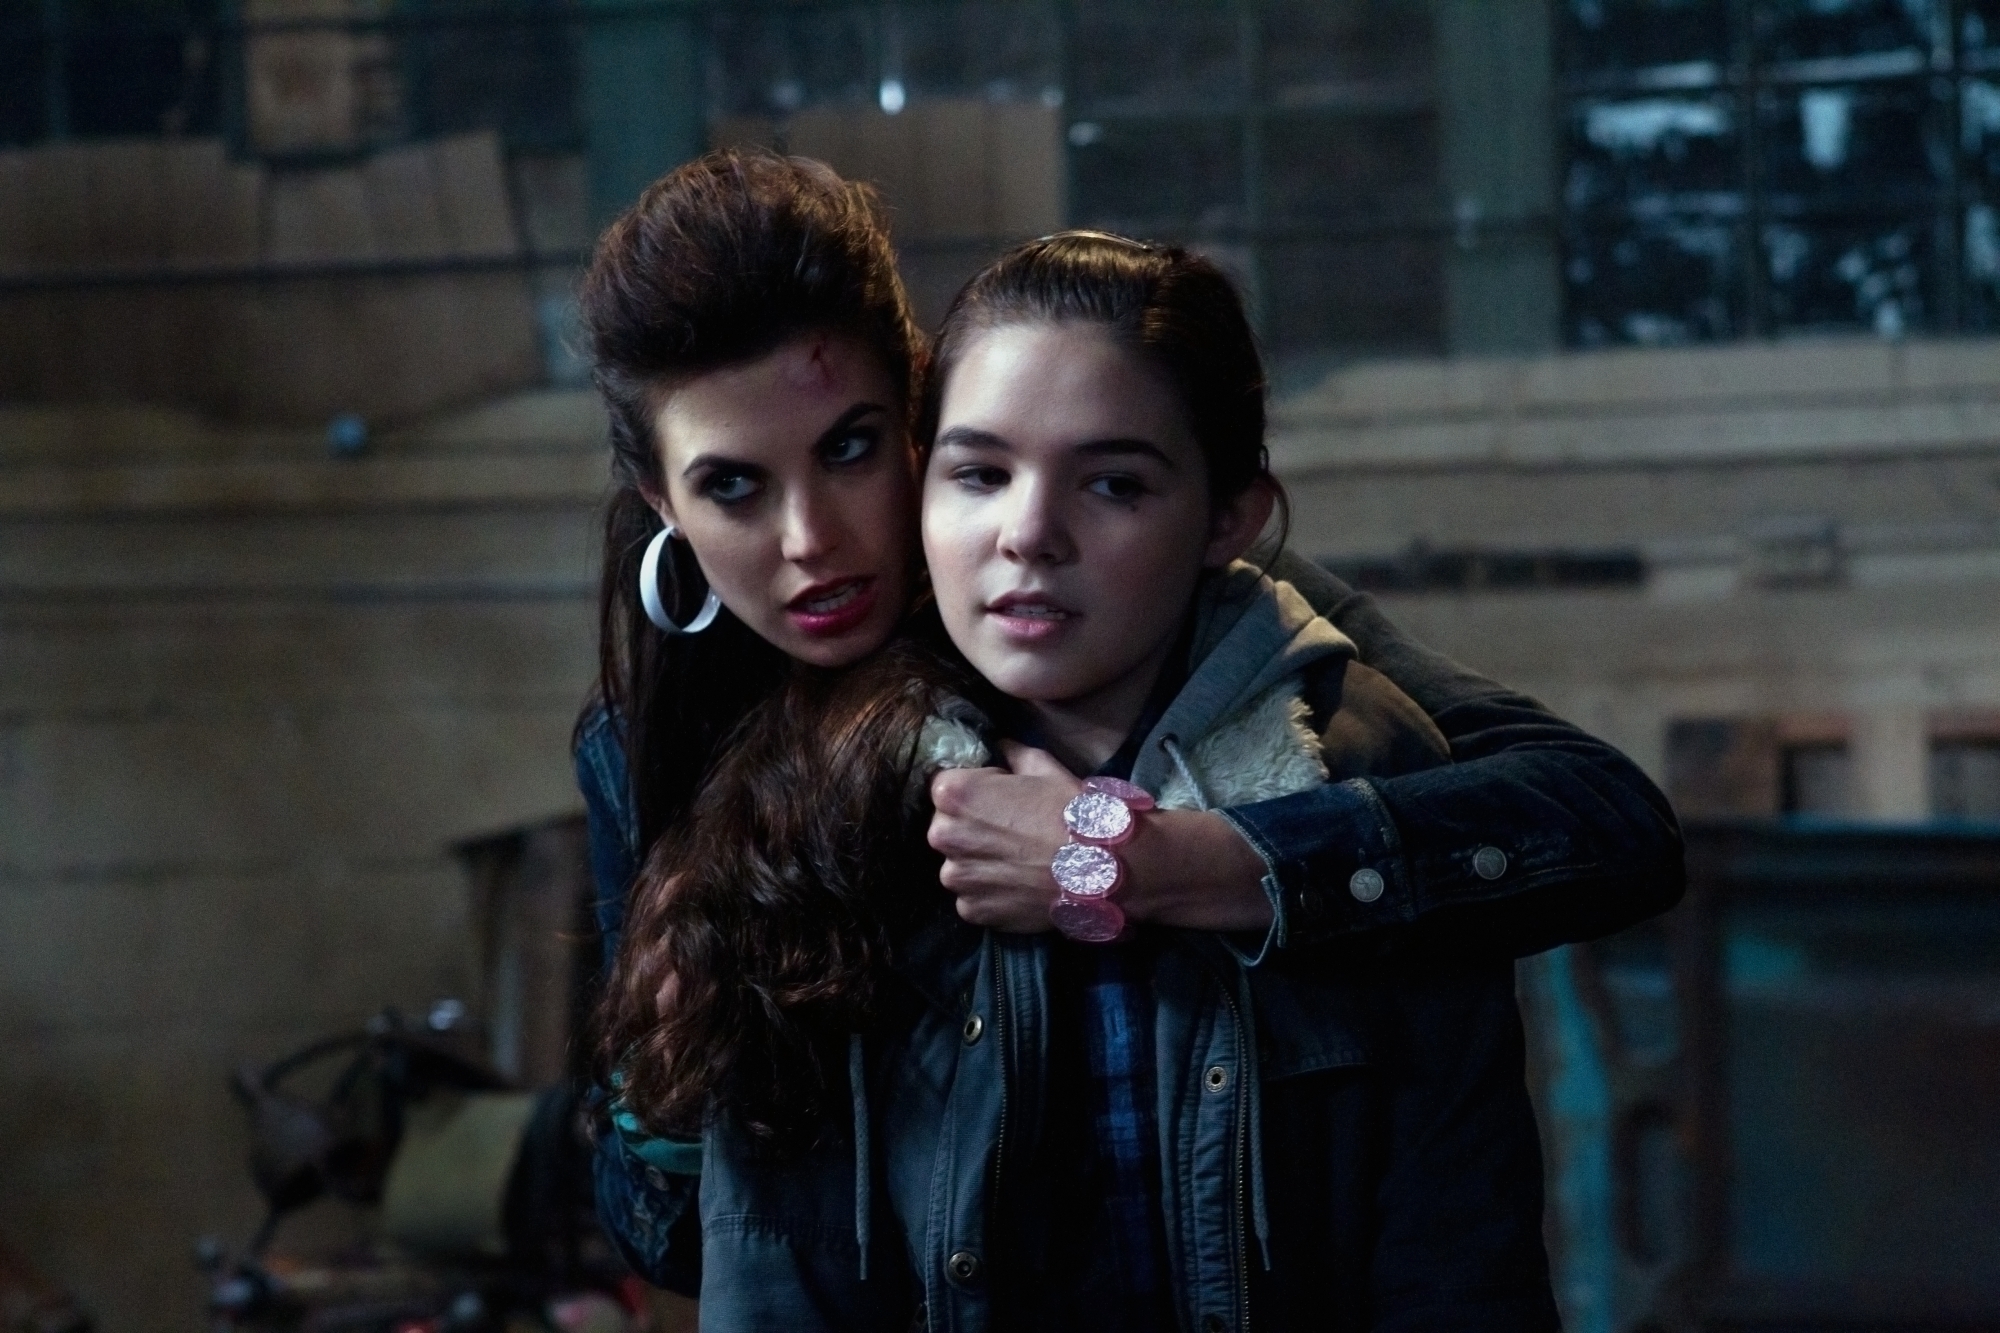 Still of Meghan Ory and Madison McLaughlin in Supernatural (2005)